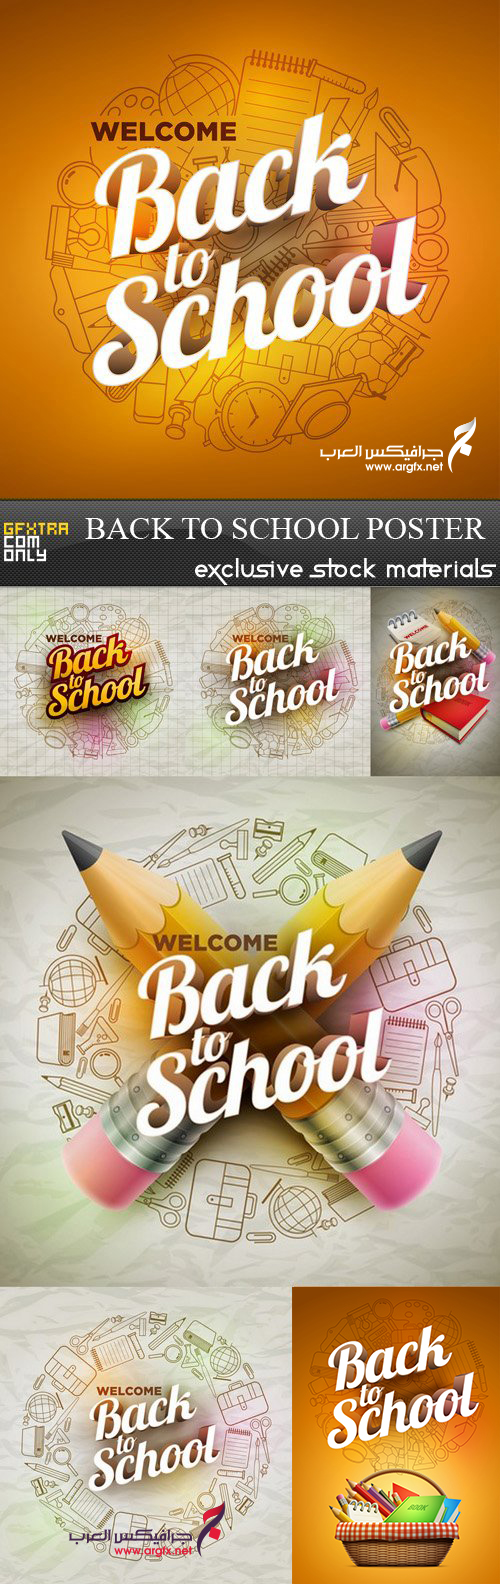  Back to School Poster - 7 EPS